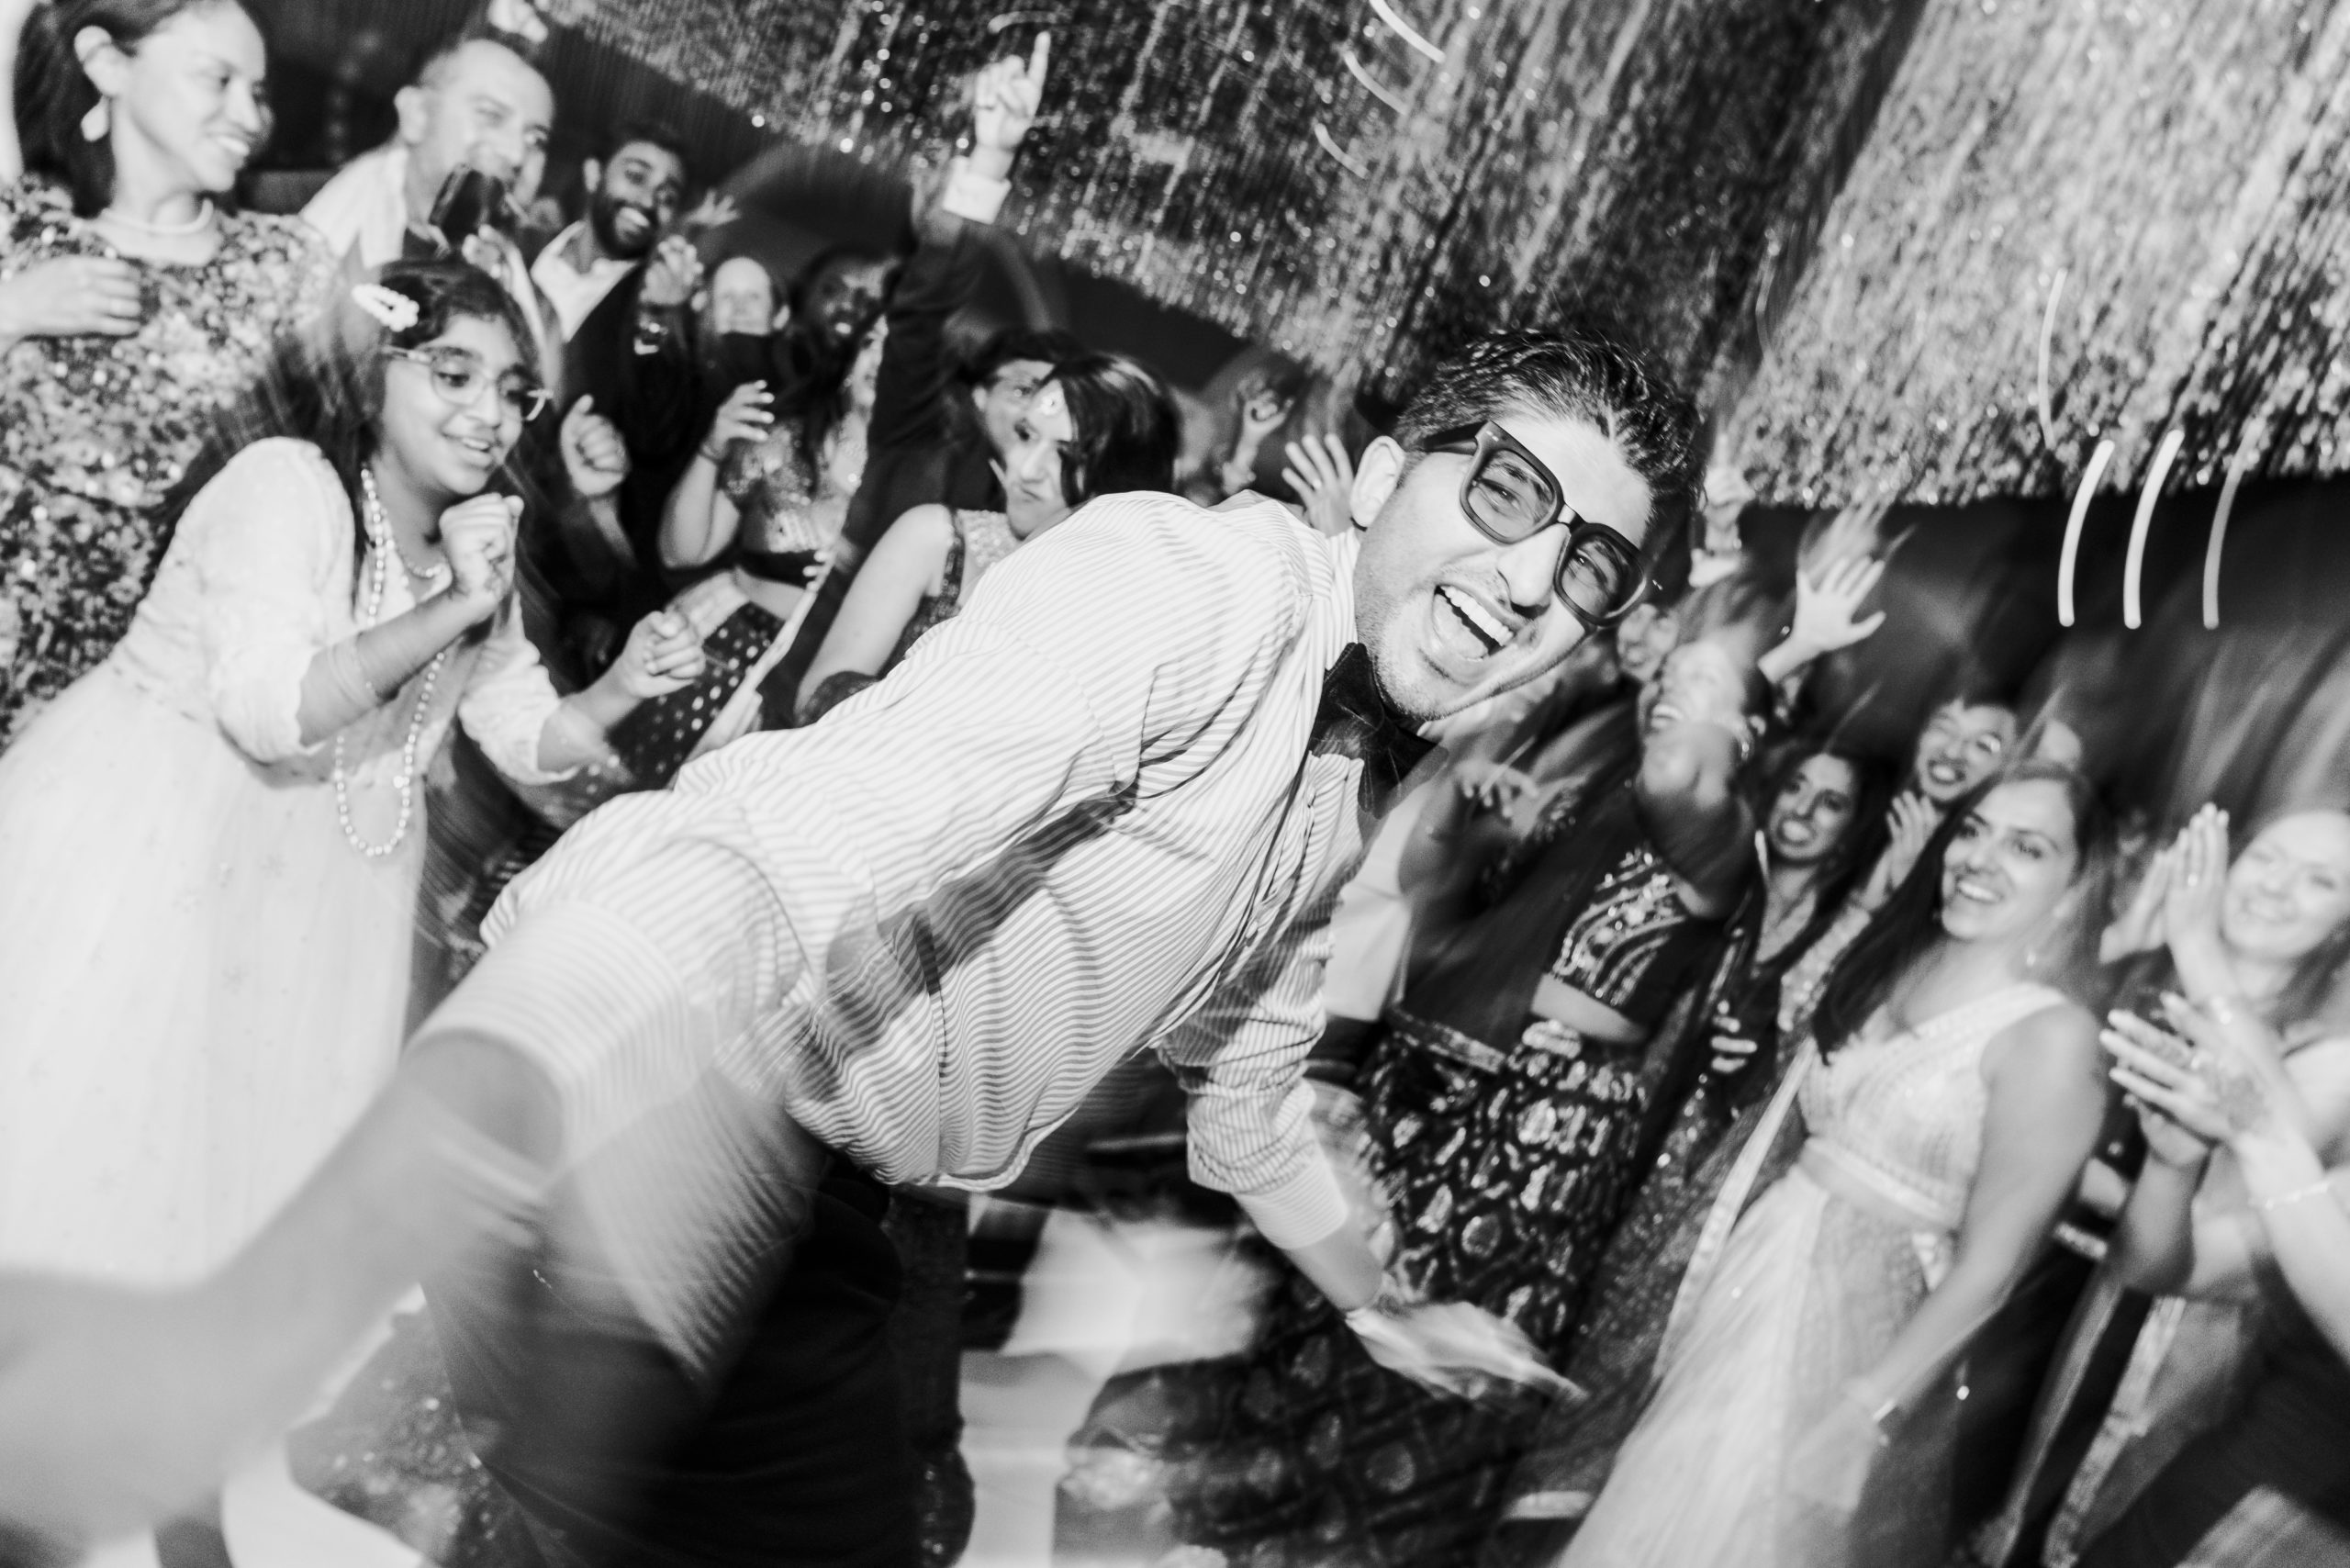 a wedding guest gets down and dirty during the open dancing portion of the wedding reception 